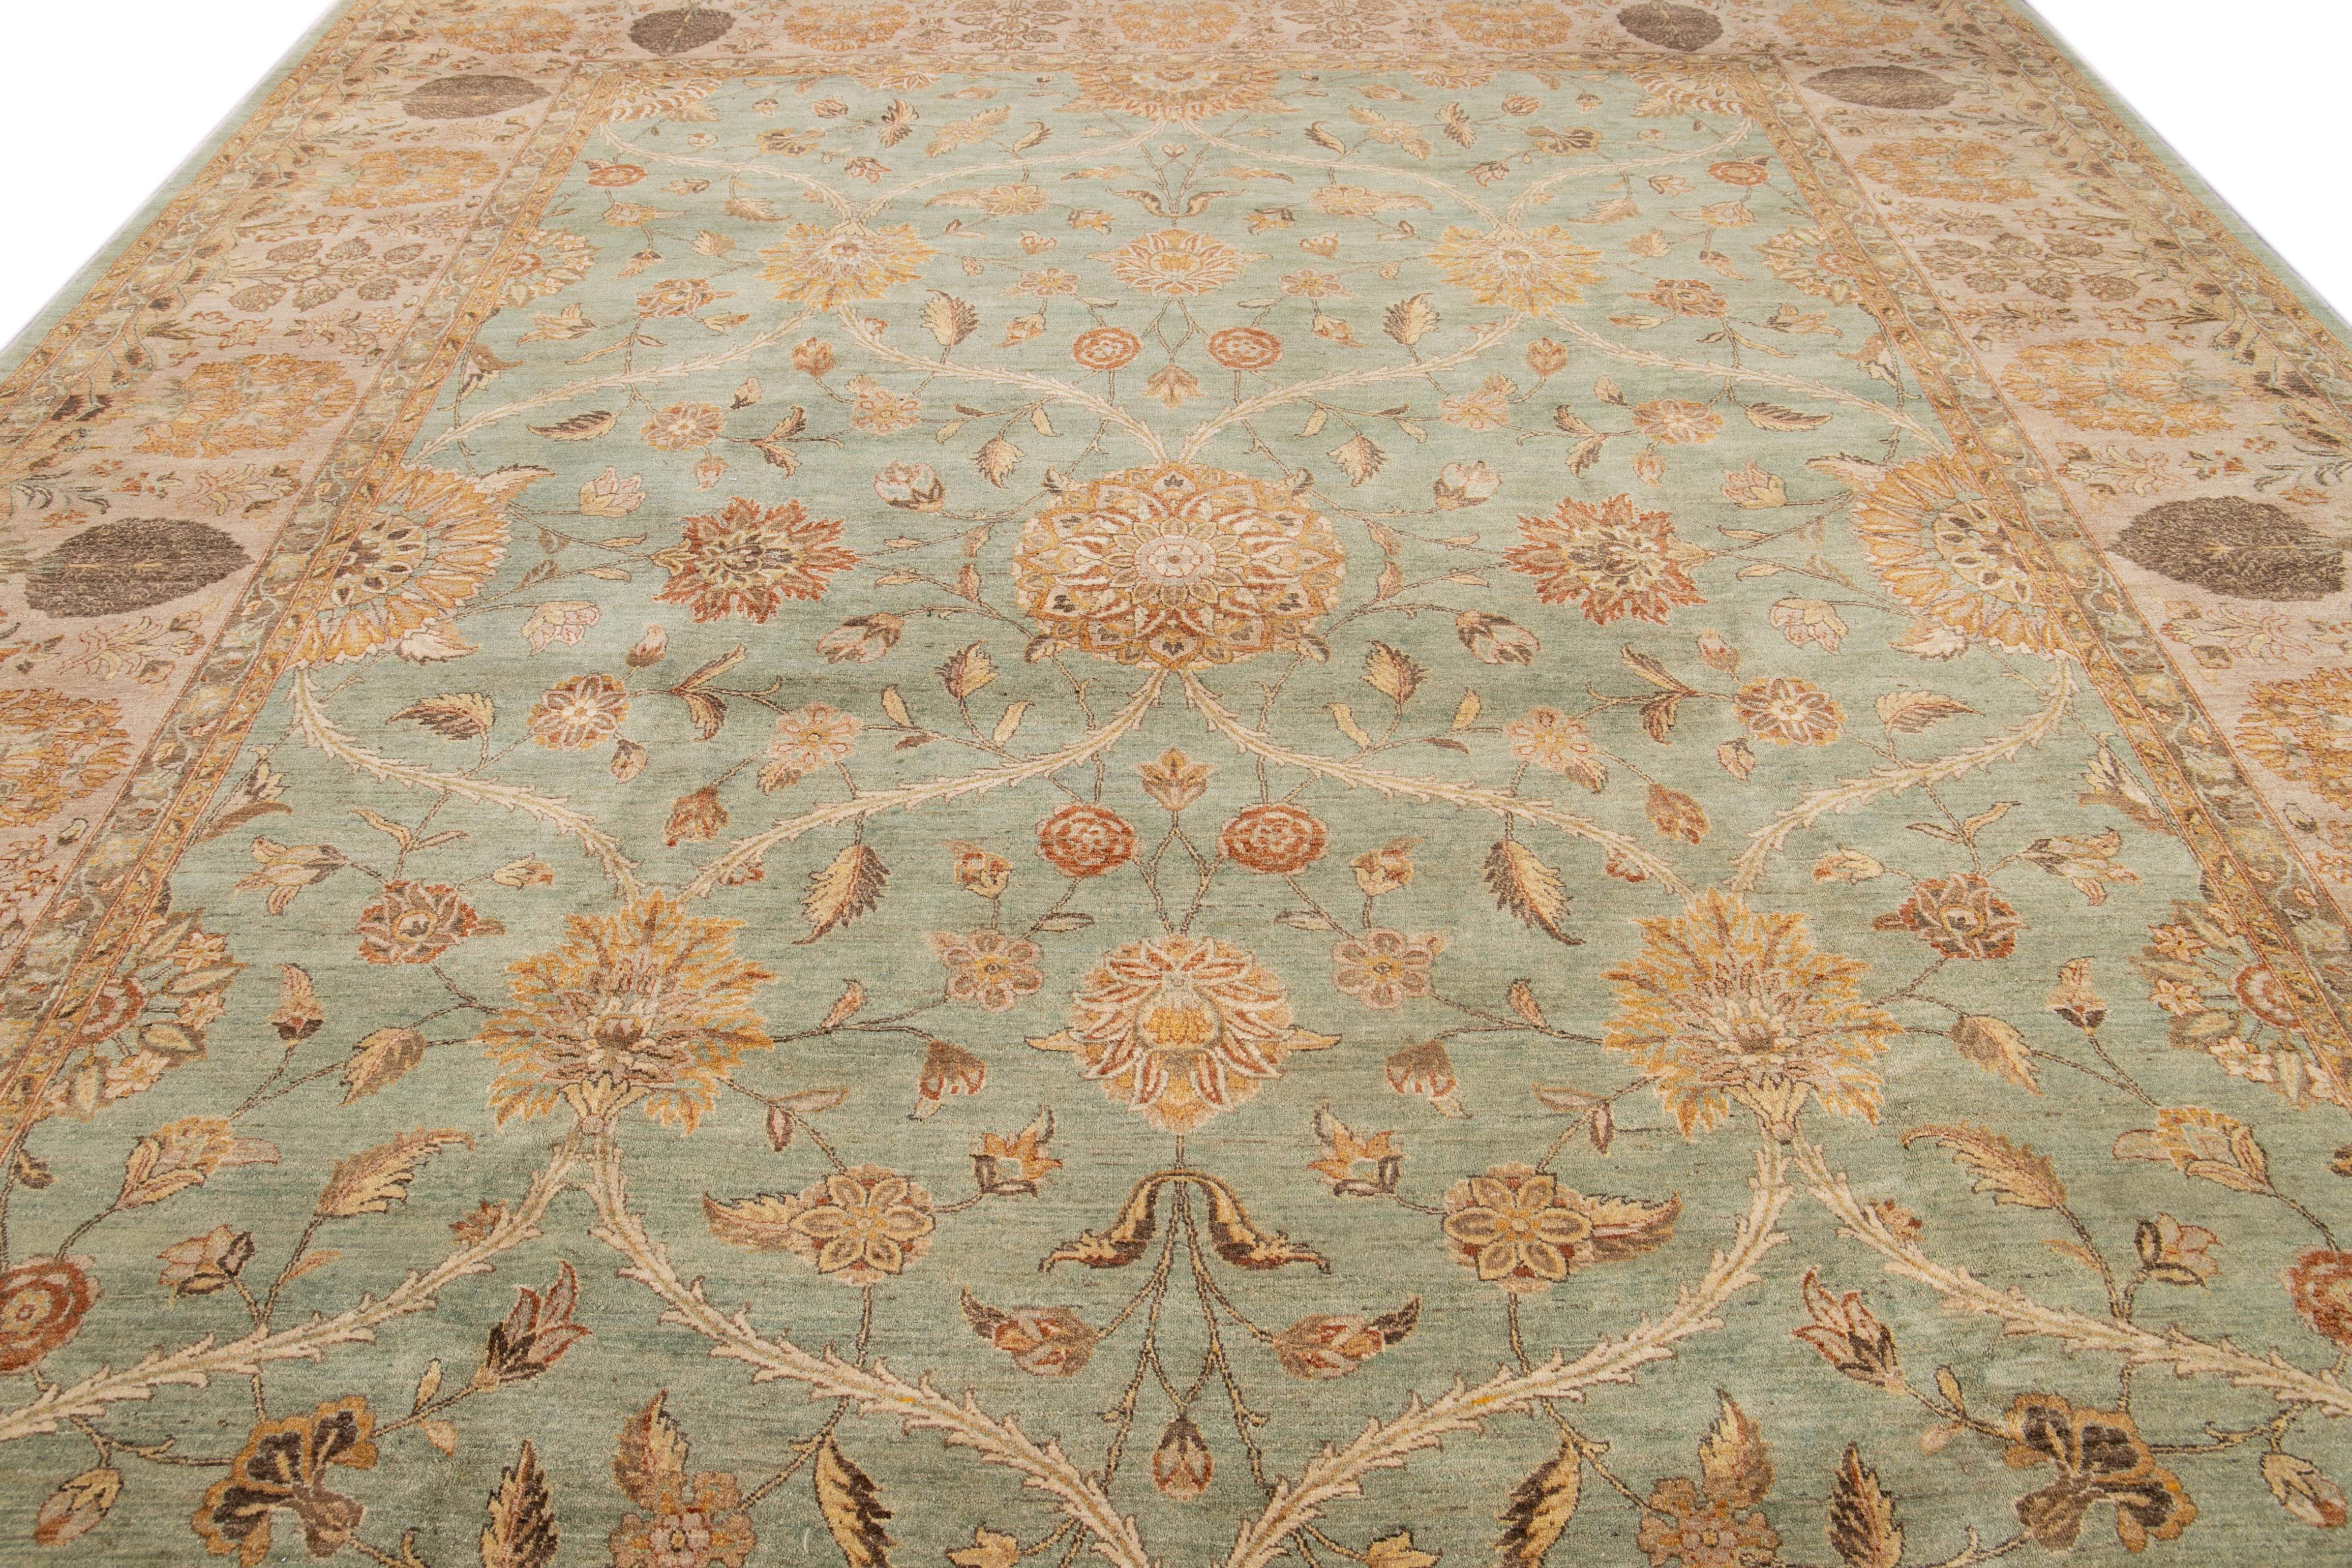 This Tabriz-style wool rug boasts a splendidly intricate floral design, classically presented in a green color field, featuring golden, beige, and brown accents.

This rug measures 11'10